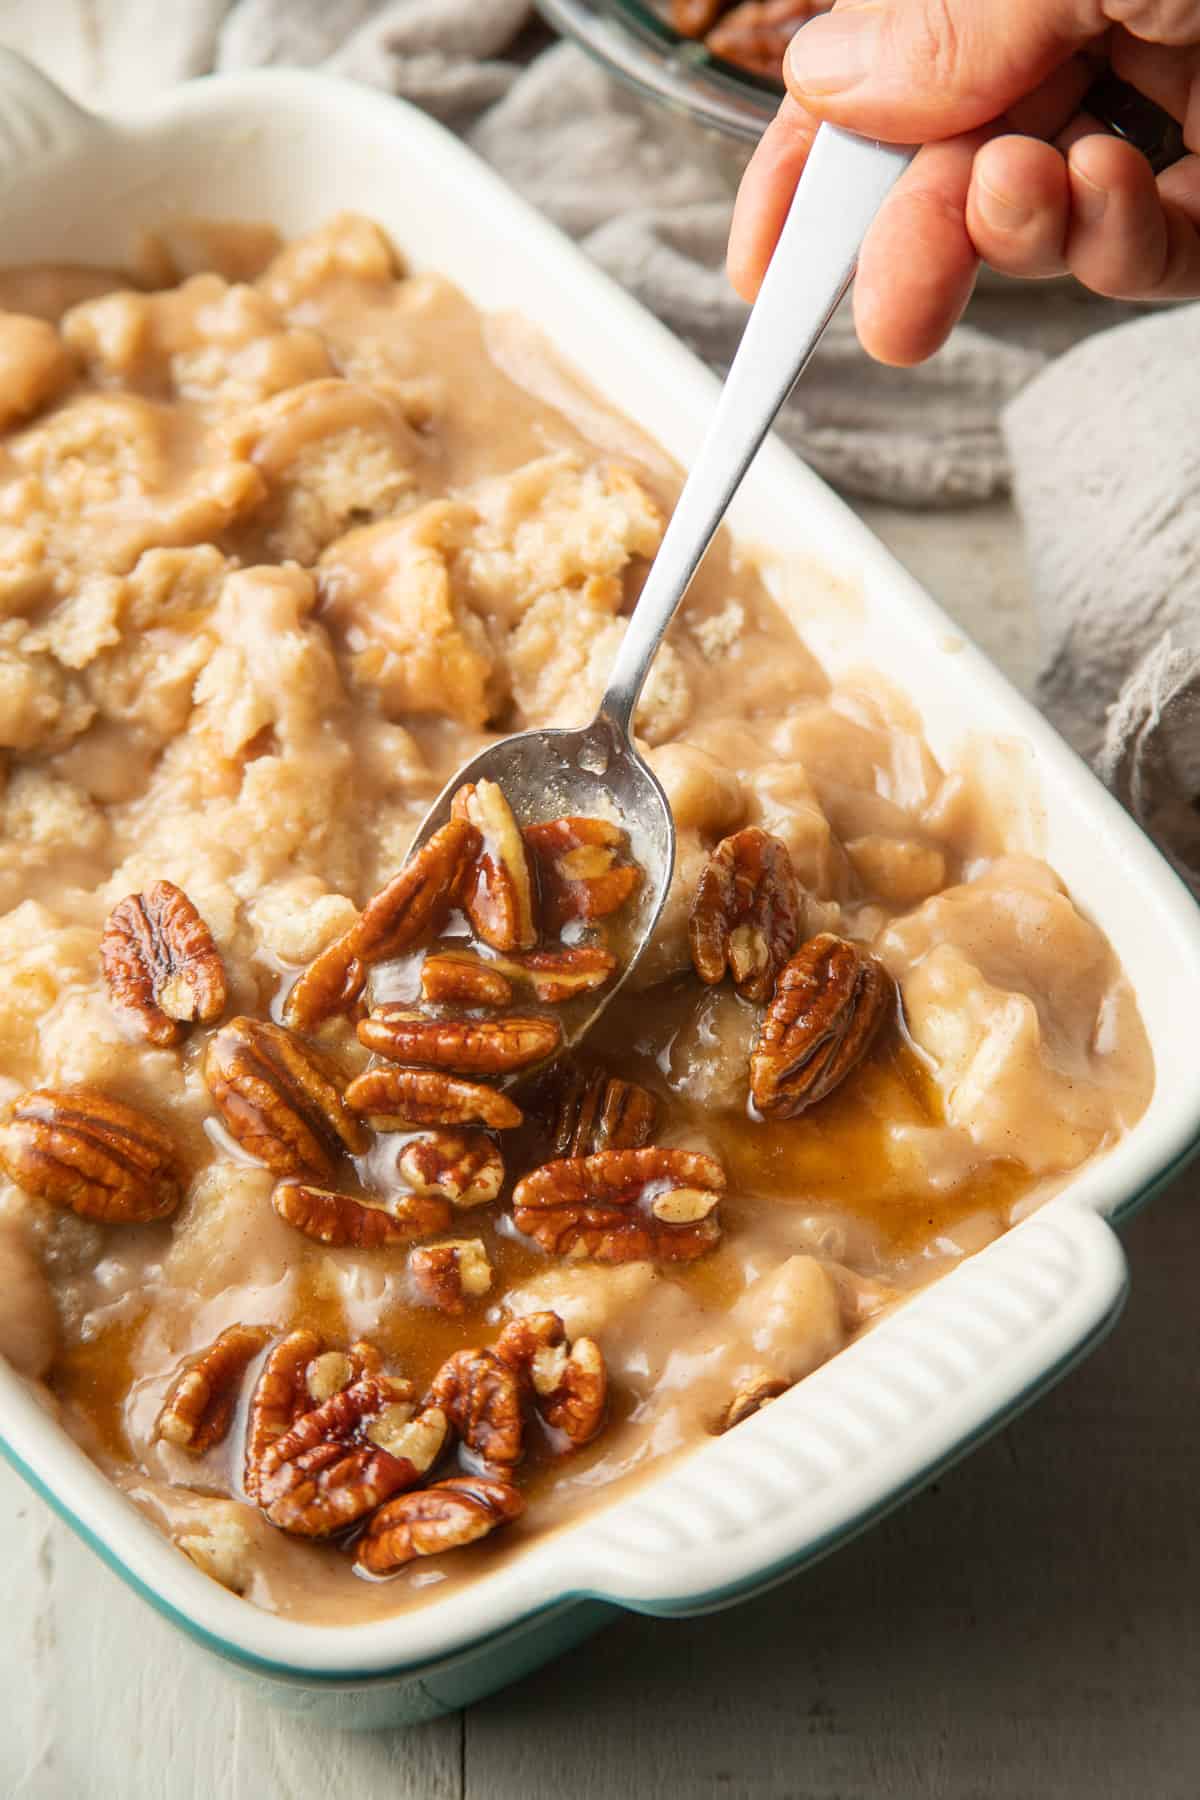 Hand spooning pecan topping over unbaked Vegan Bread Pudding.